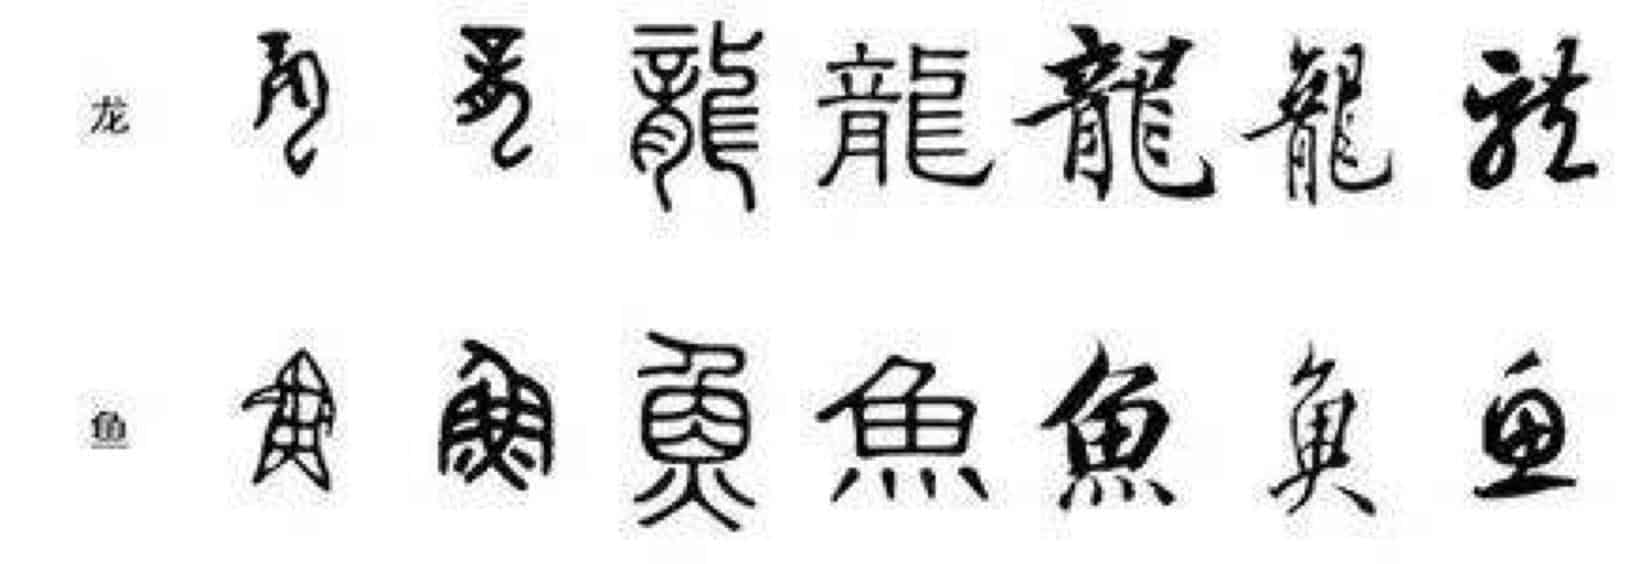 Chinese characters styles